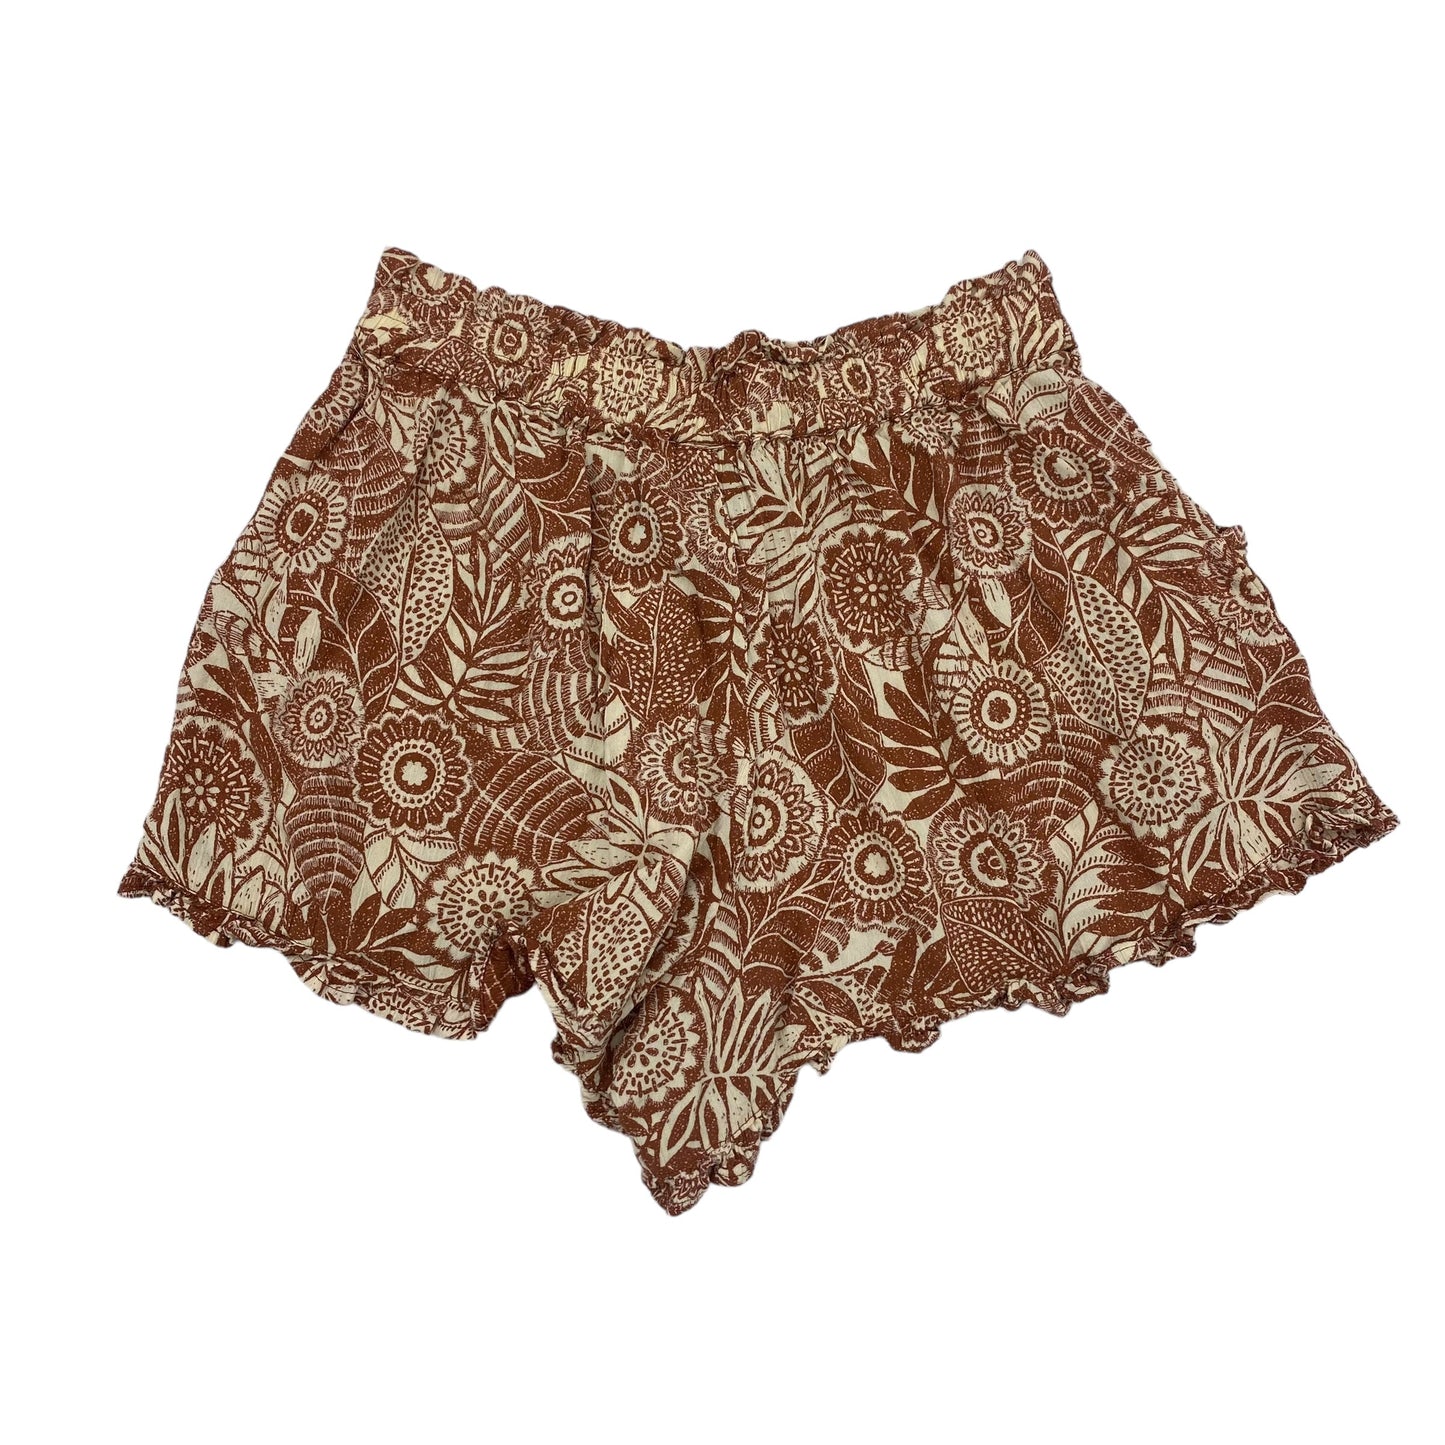 BROWN ANGIE SHORTS, Size L